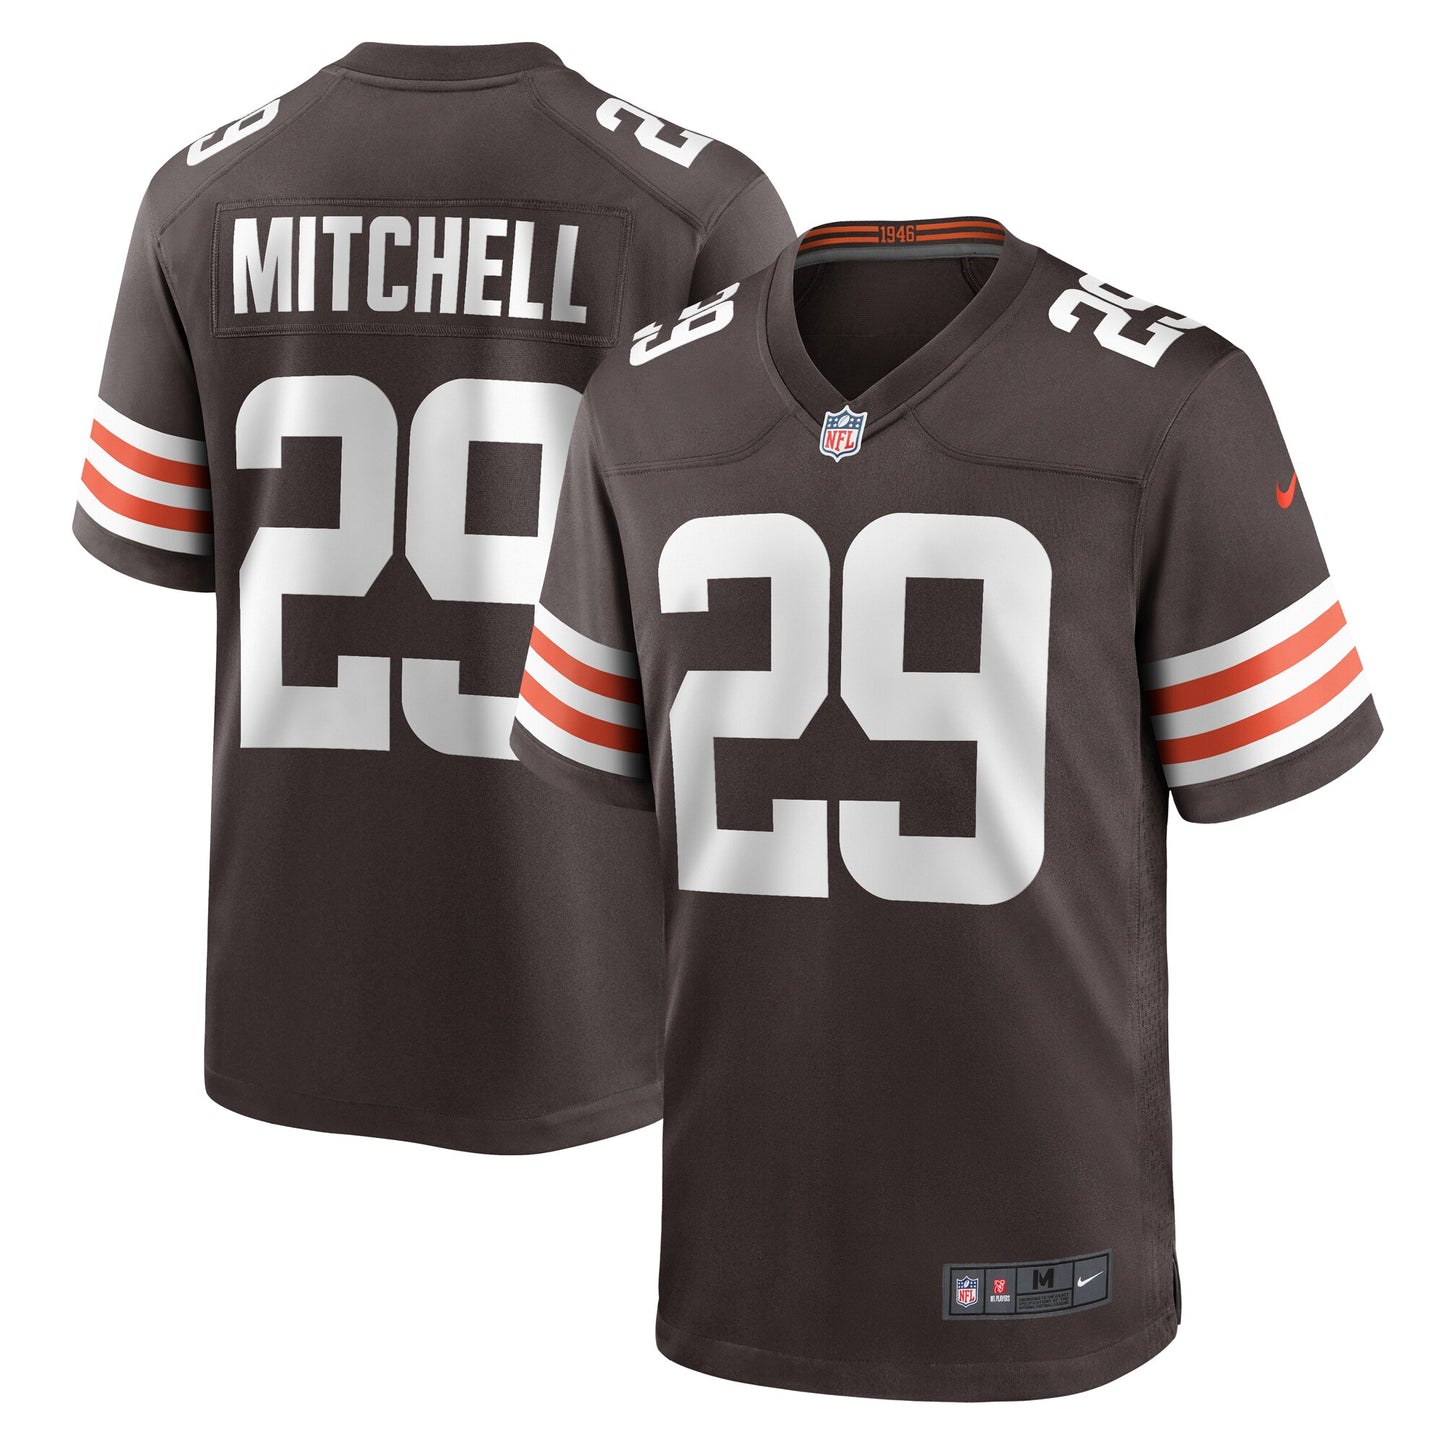 Cameron Mitchell Cleveland Browns Nike Team Game Jersey -  Brown